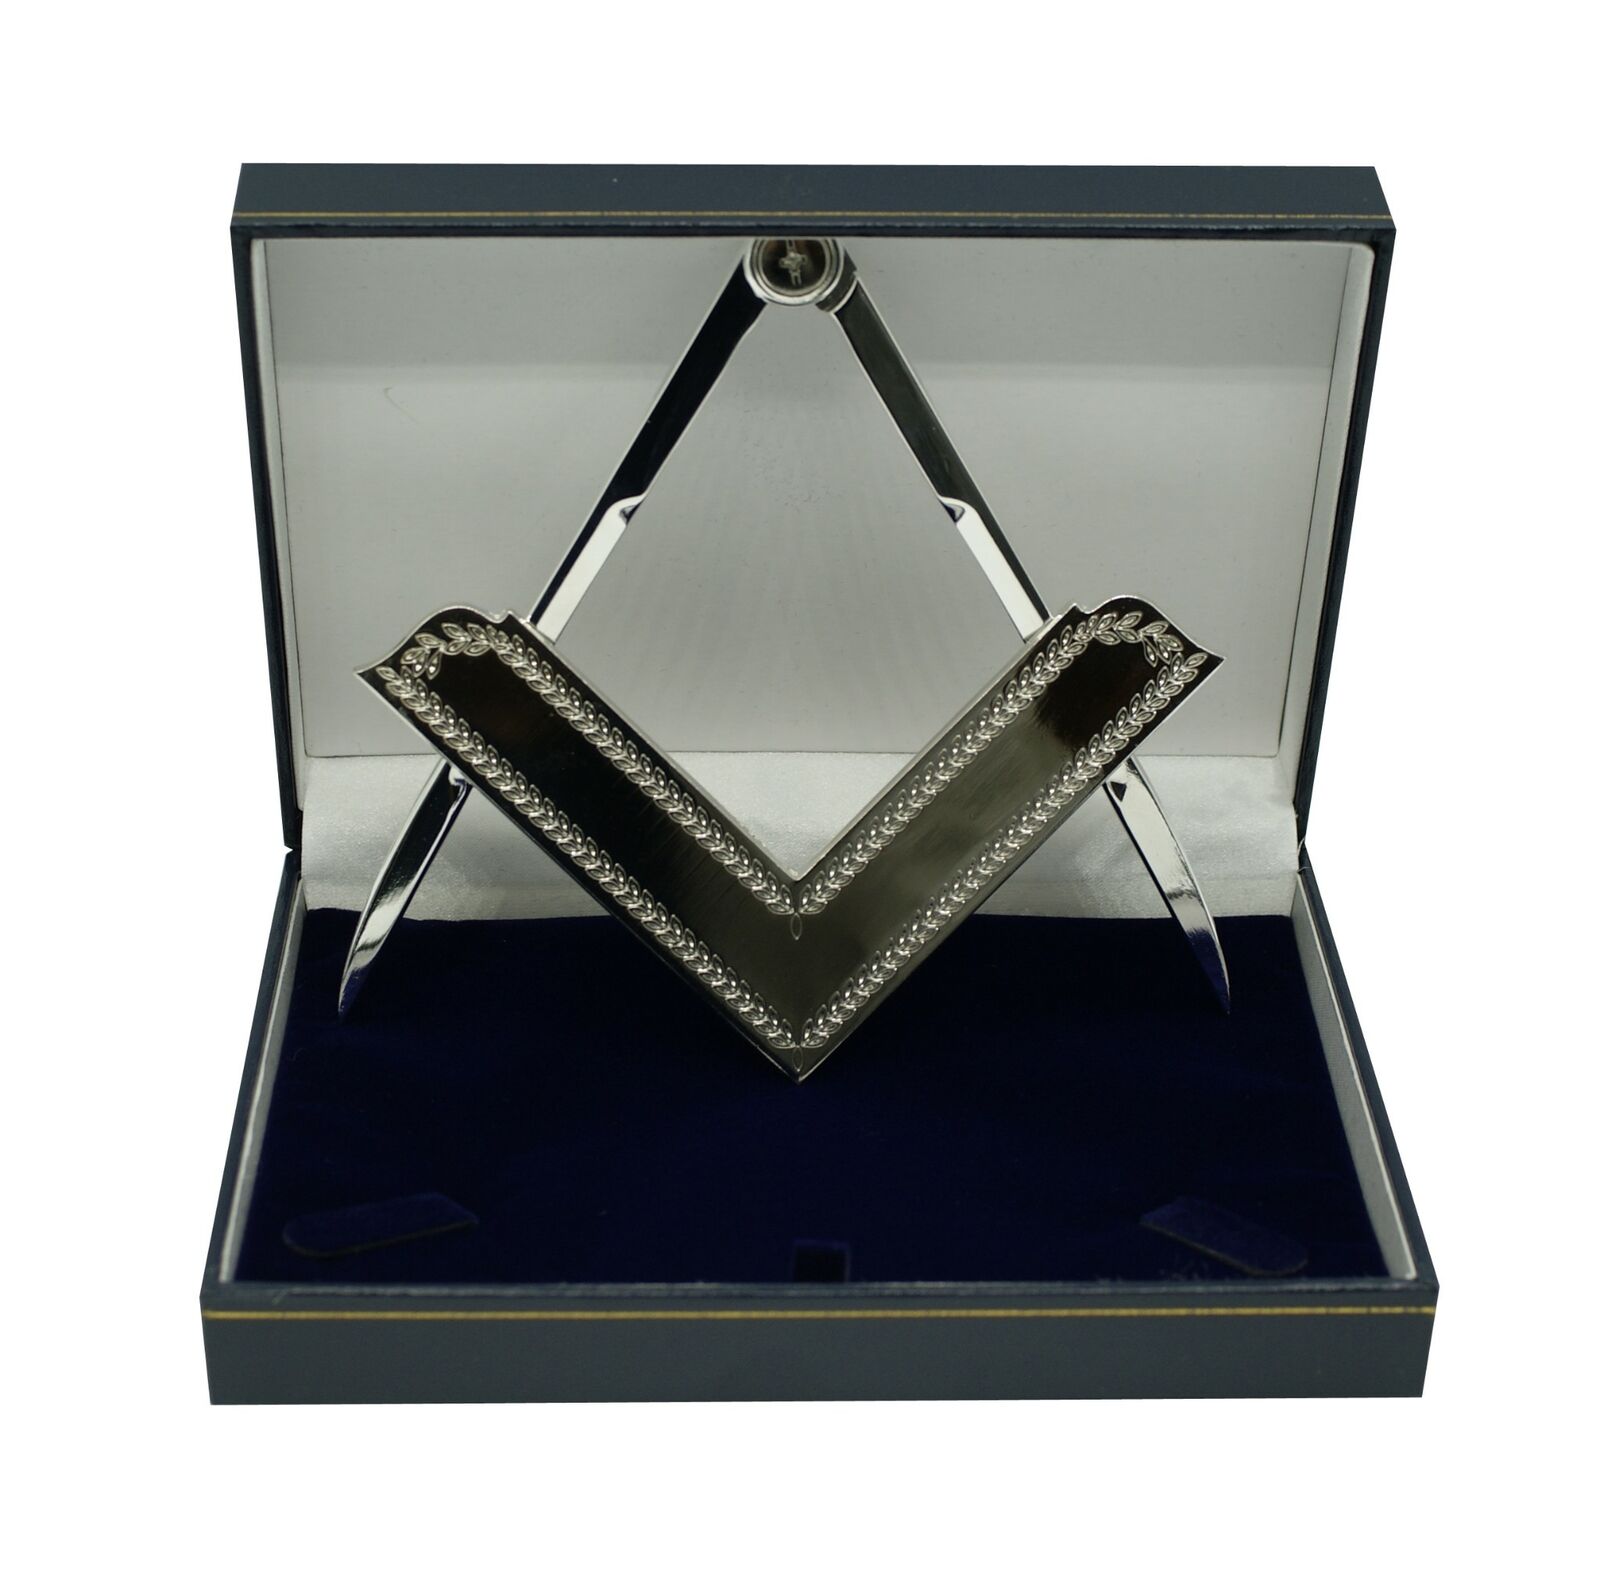 Freemasons Masonic Square and Compass Set gold or silver (full lodge size)